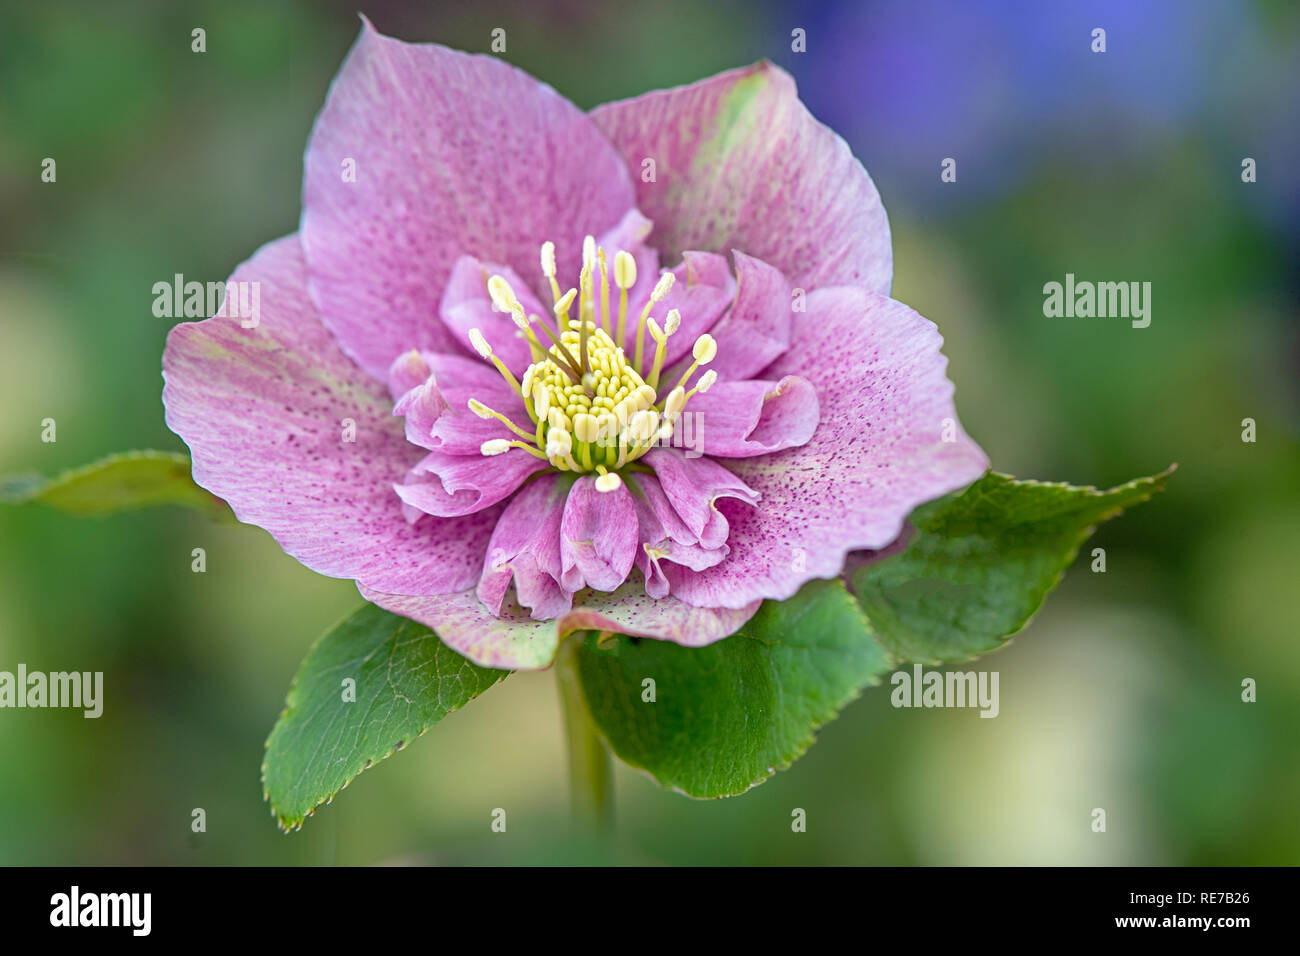 Close-up image of the beautiful winter flowering, pink Hellebore flower also known as the Lenten Rose or Christmas Rose Stock Photo